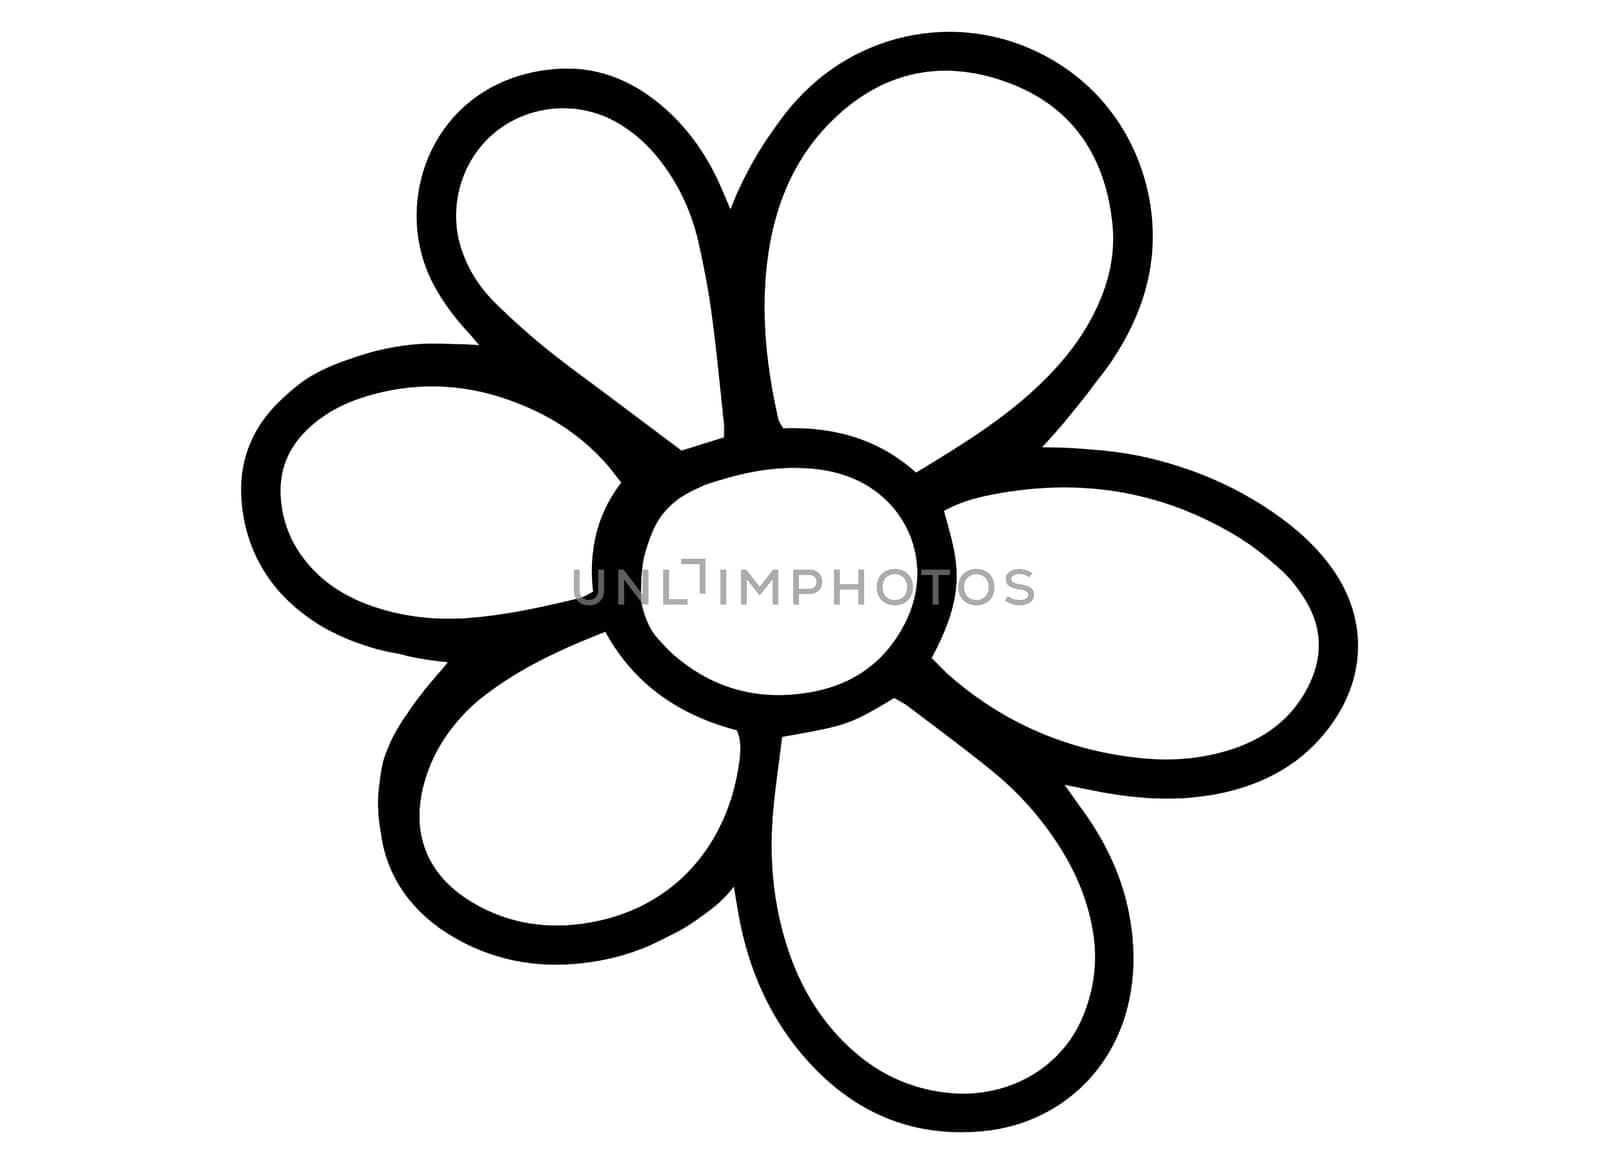 Printable Coloring Page for Kids. Black and White Daisy Flower Isolated Illustration. Coloring Book with